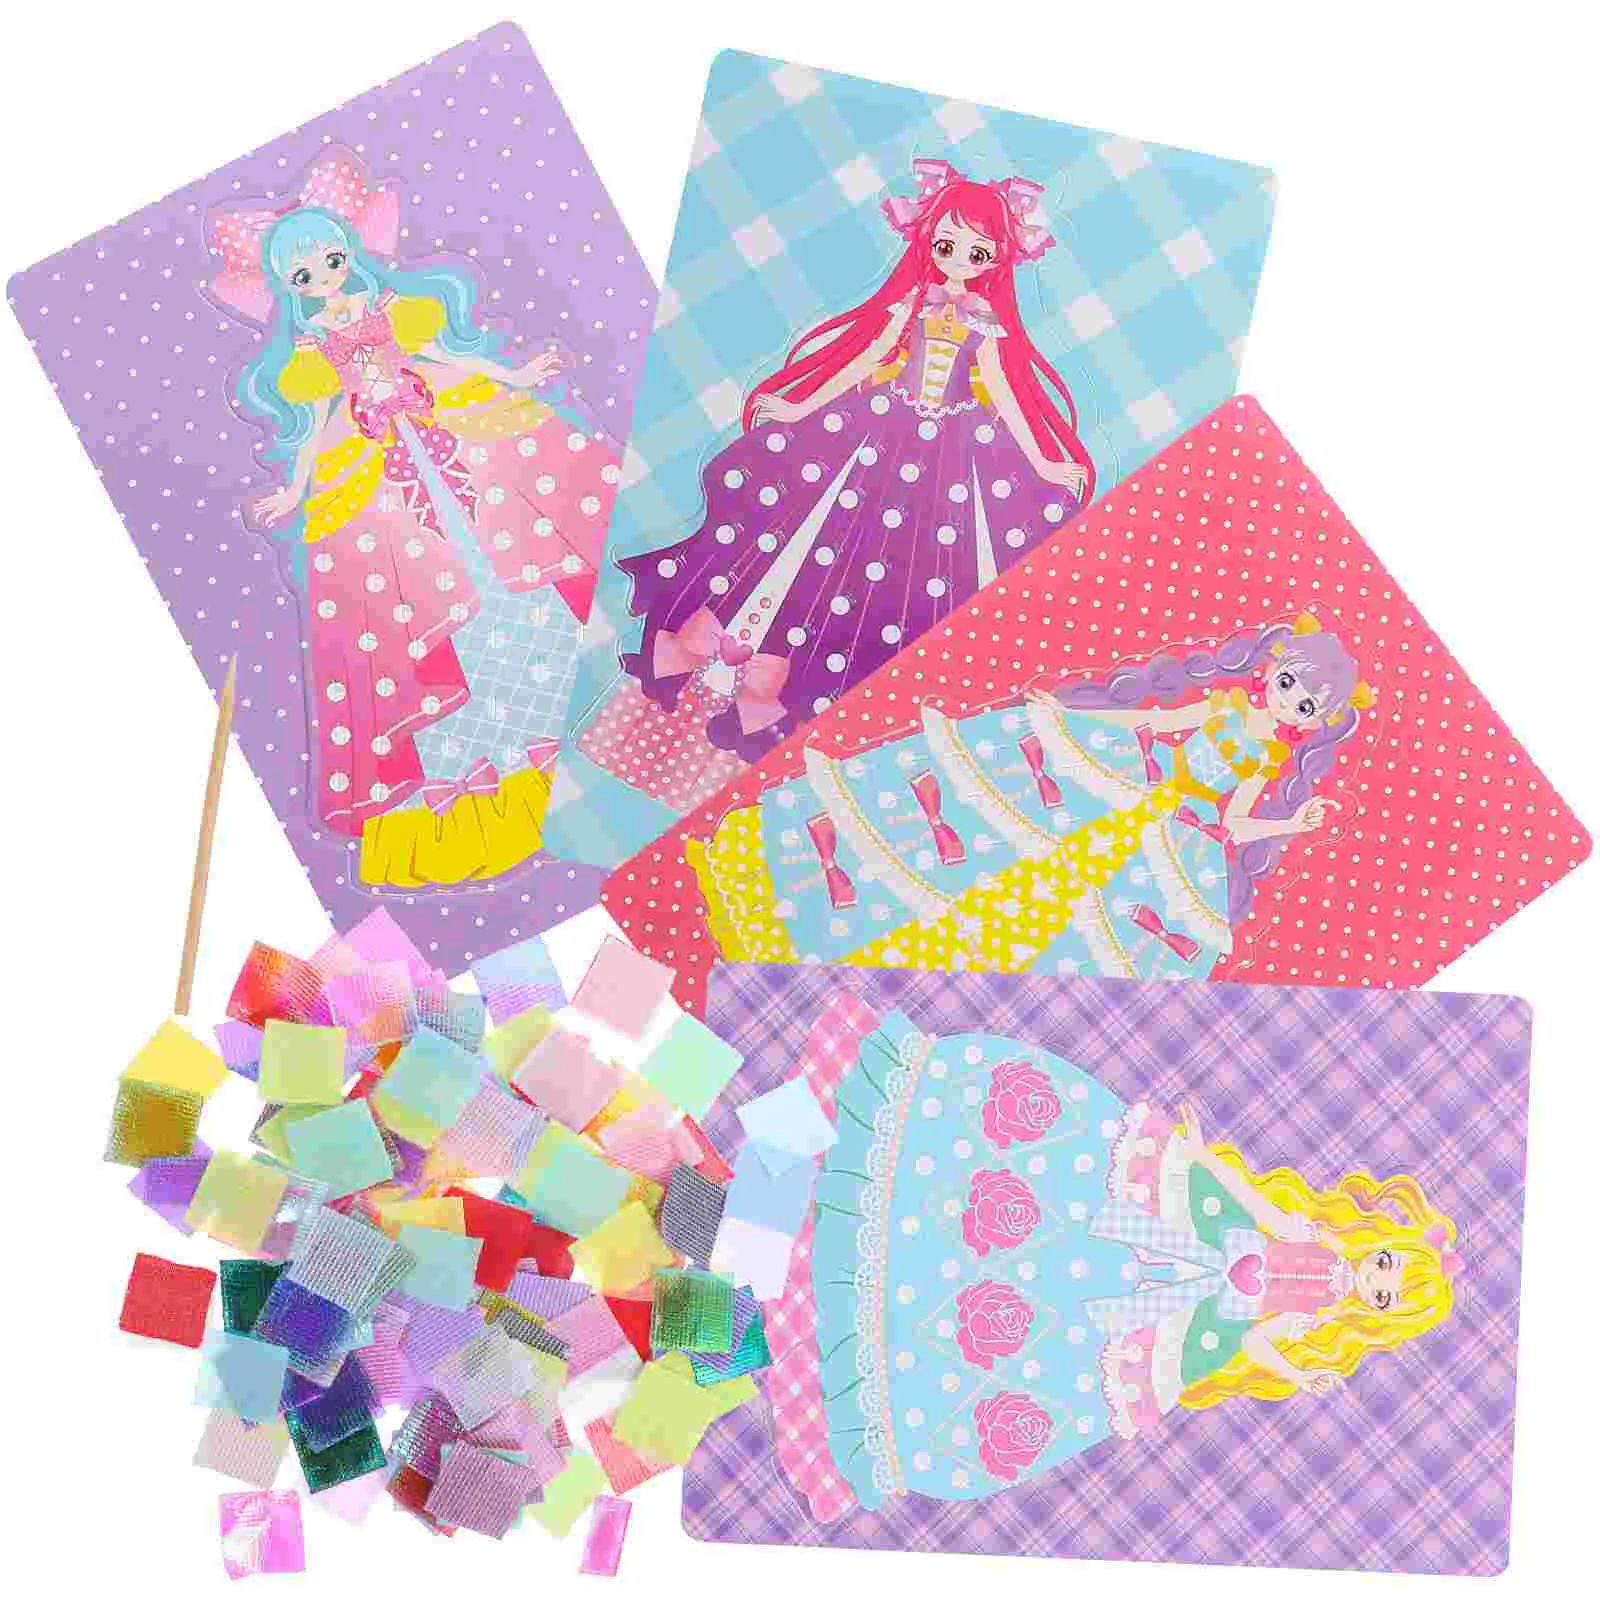 

Puncture Painting Girls Toy Gift Sewing Embroidery Kit DIY Needlework Tool Handmade Stitchwork Children Crafts